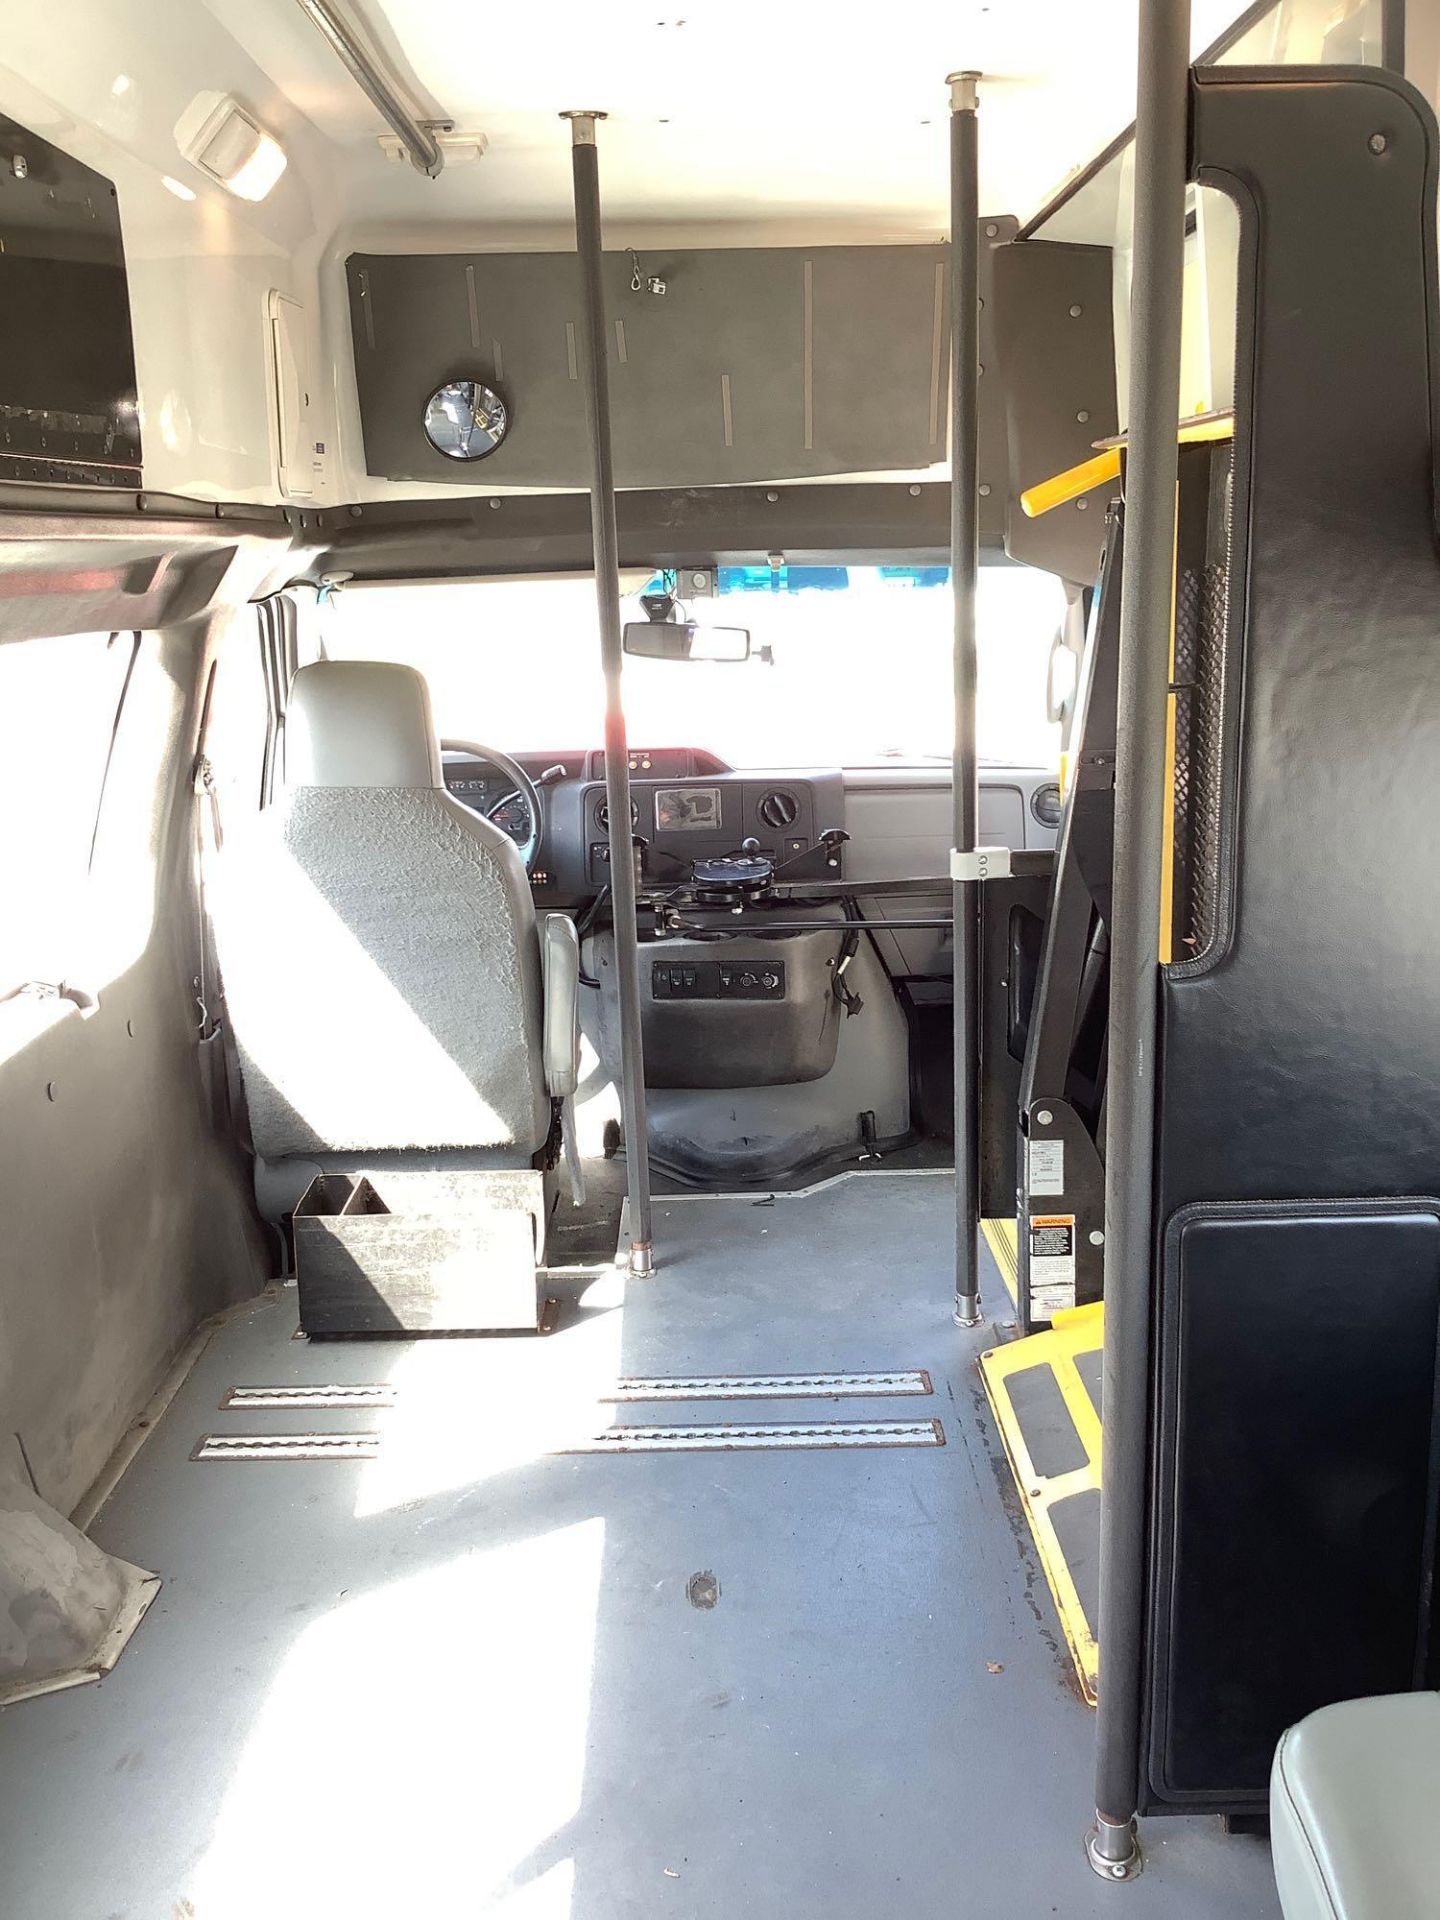 2014 FORD ECONOLINE E-350 SUPER DUTY EXTENDED MOBILITY VAN , AUTOMATIC, AC/ HEAT AIR CONDITION, BRAU - Image 31 of 34